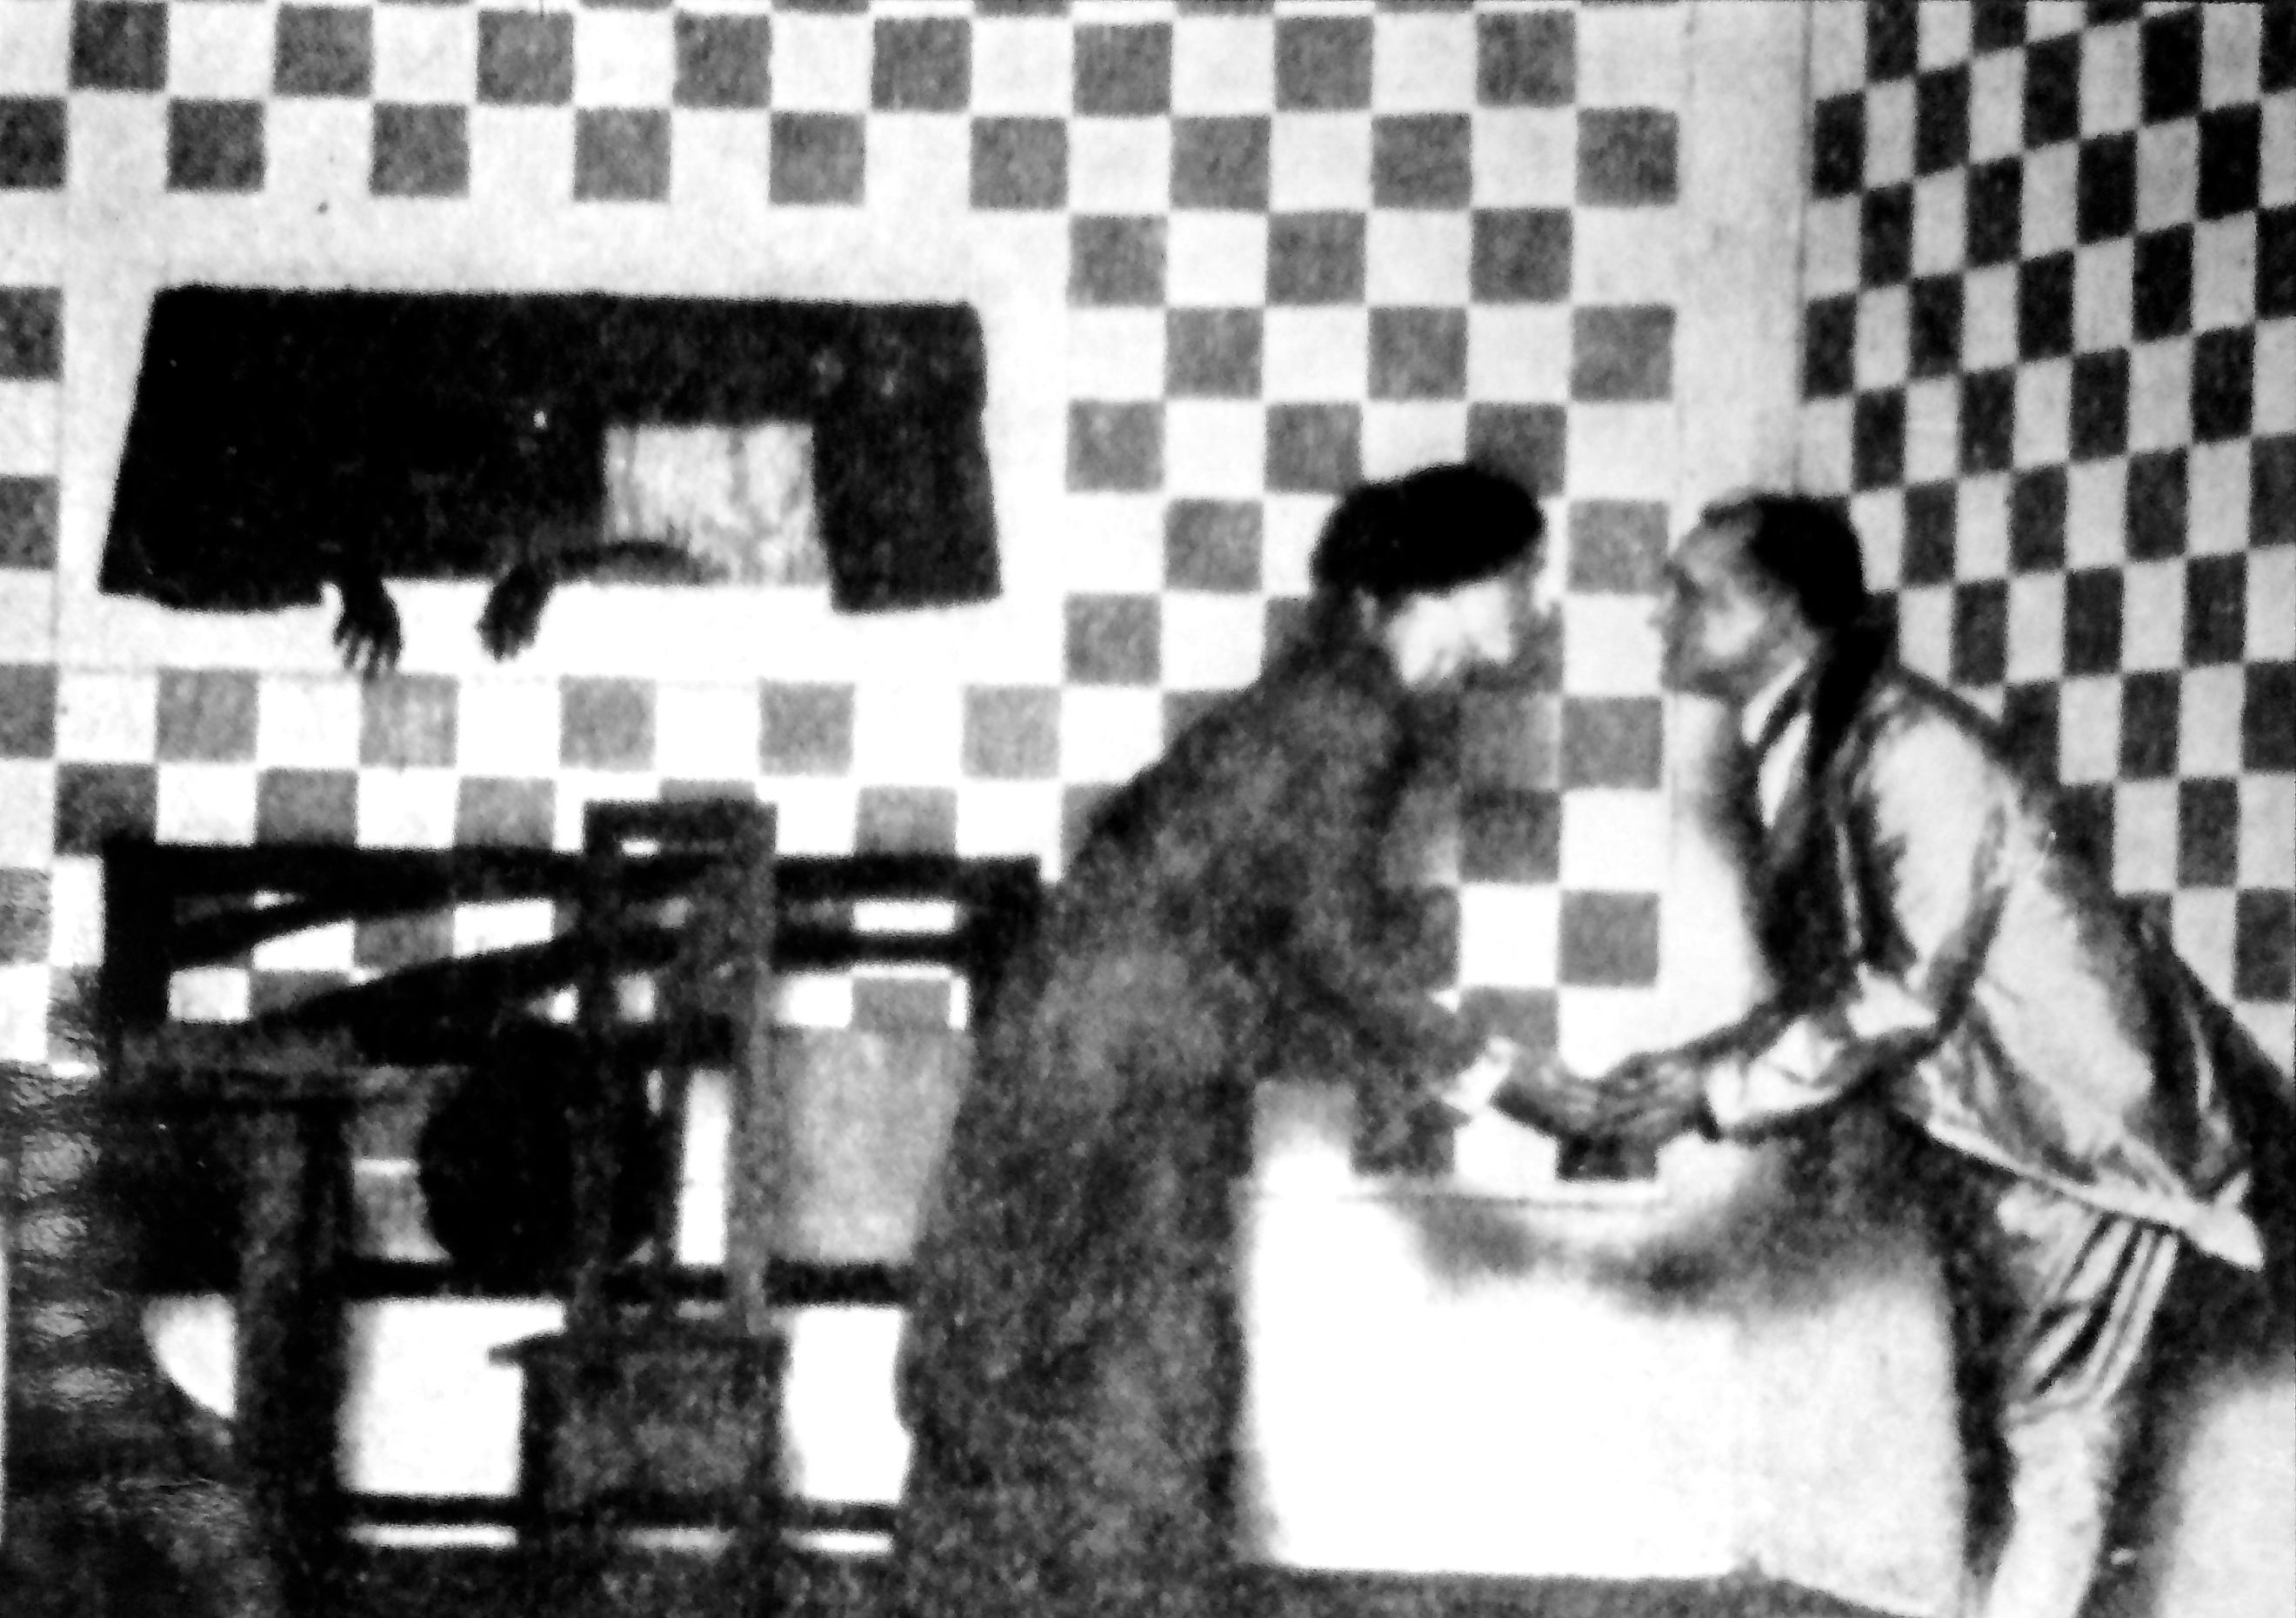 Mina Loy and Williams holding hands and bowing to each other on checkerboard set of Lima Beans